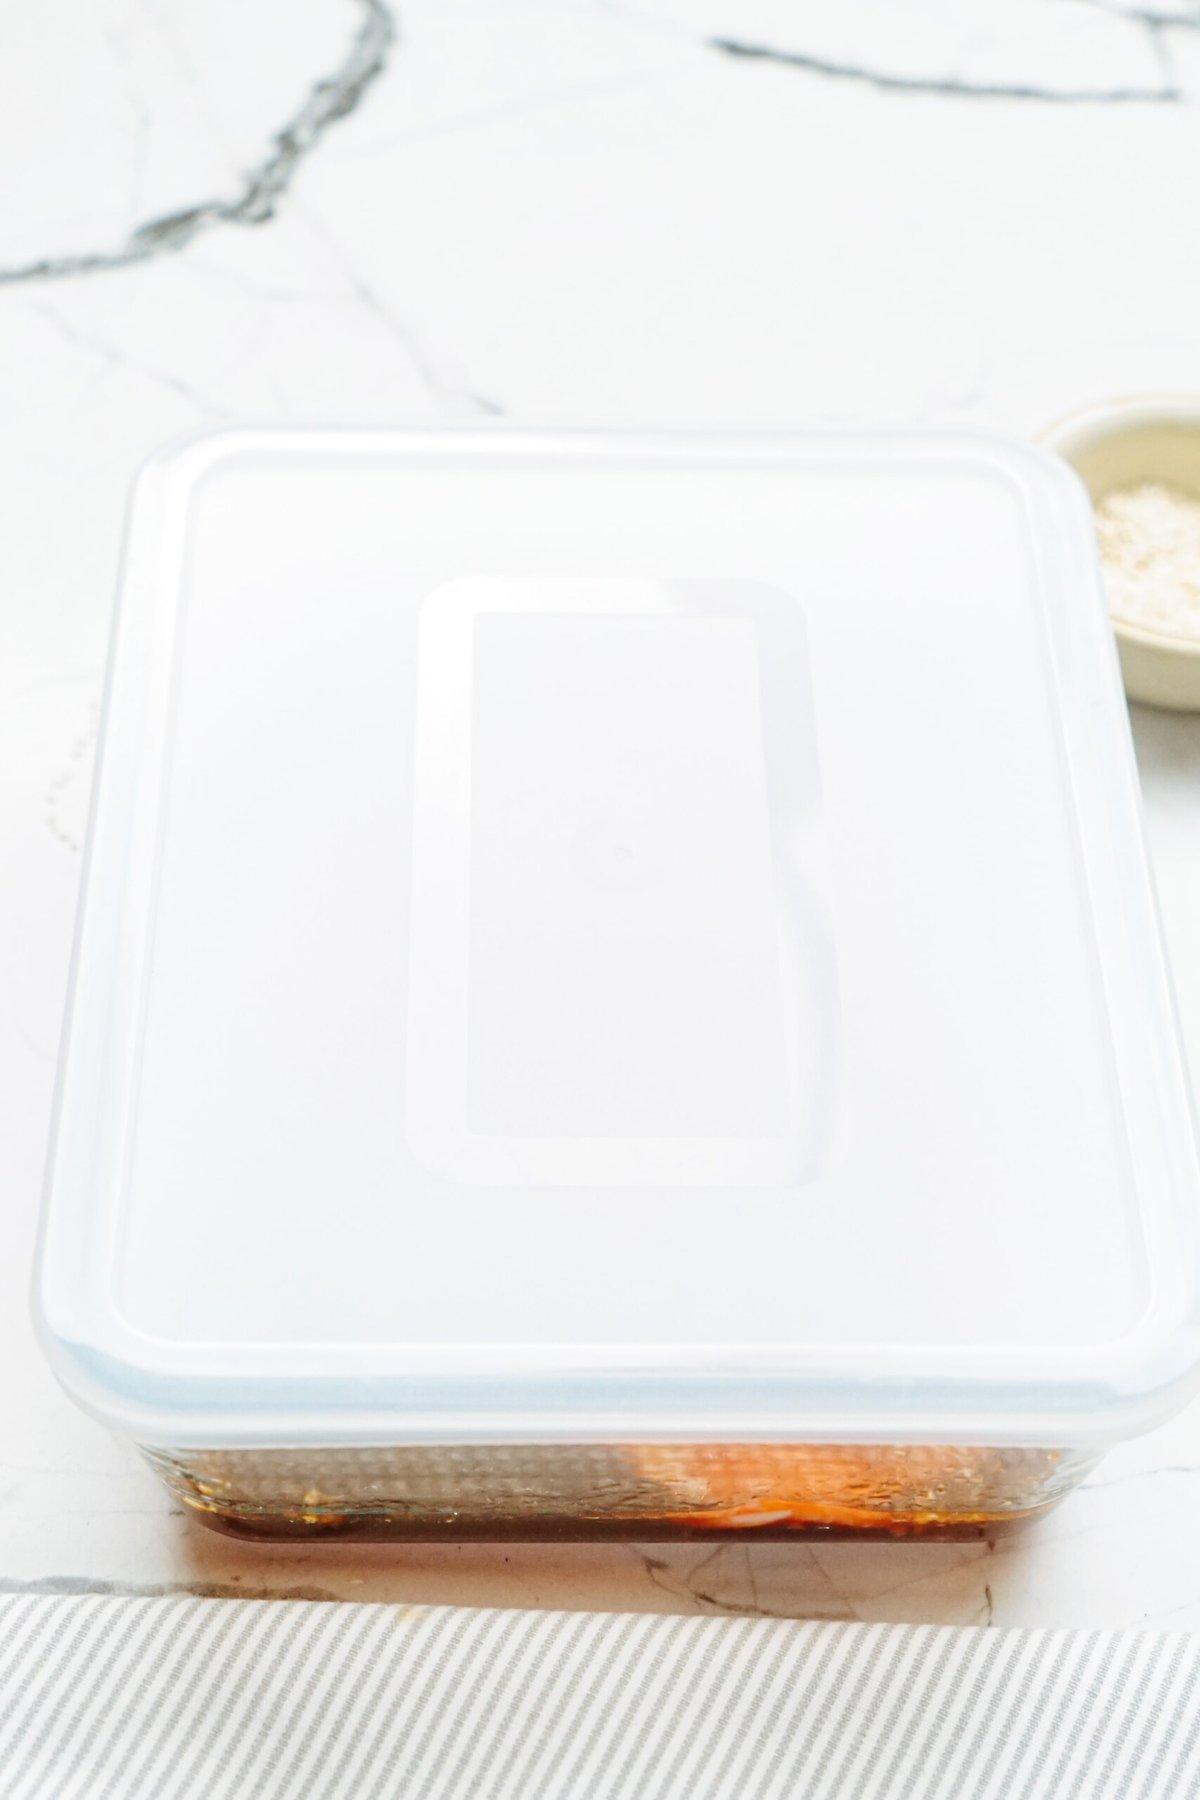 A plastic container with a lid placed on the marble table.